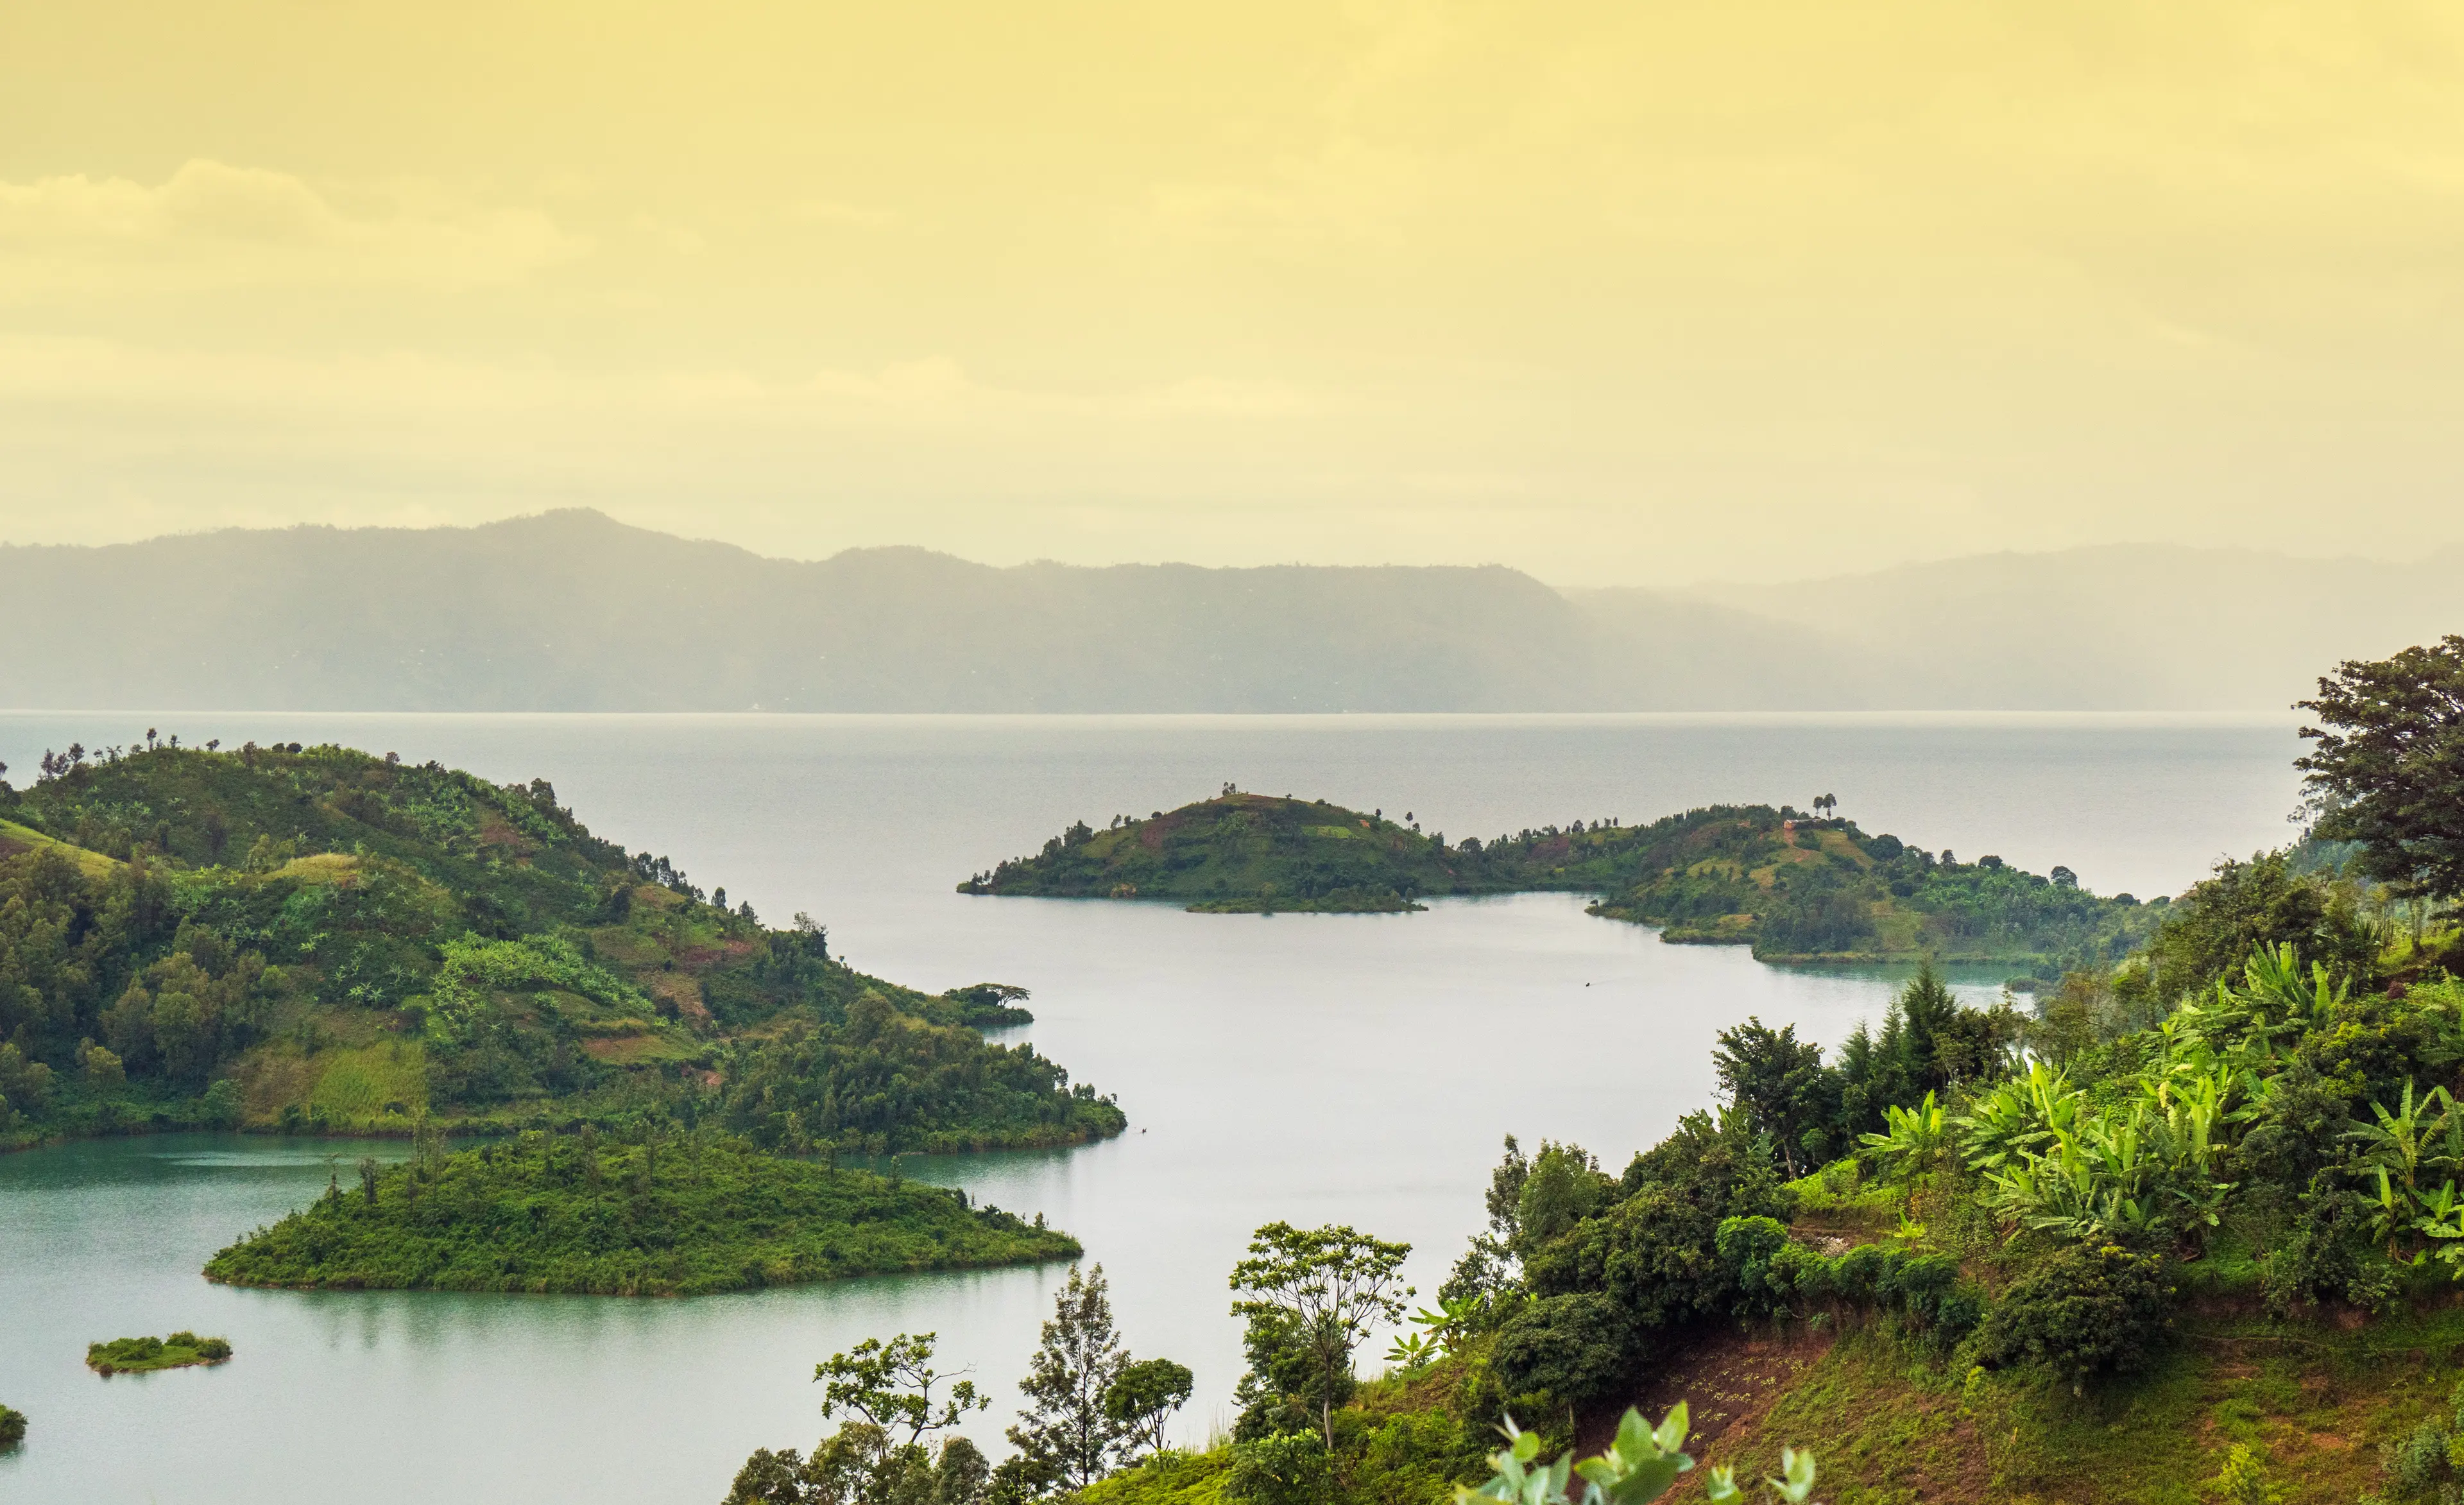 5-Day Local Adventure and Sightseeing Tour in Rwanda